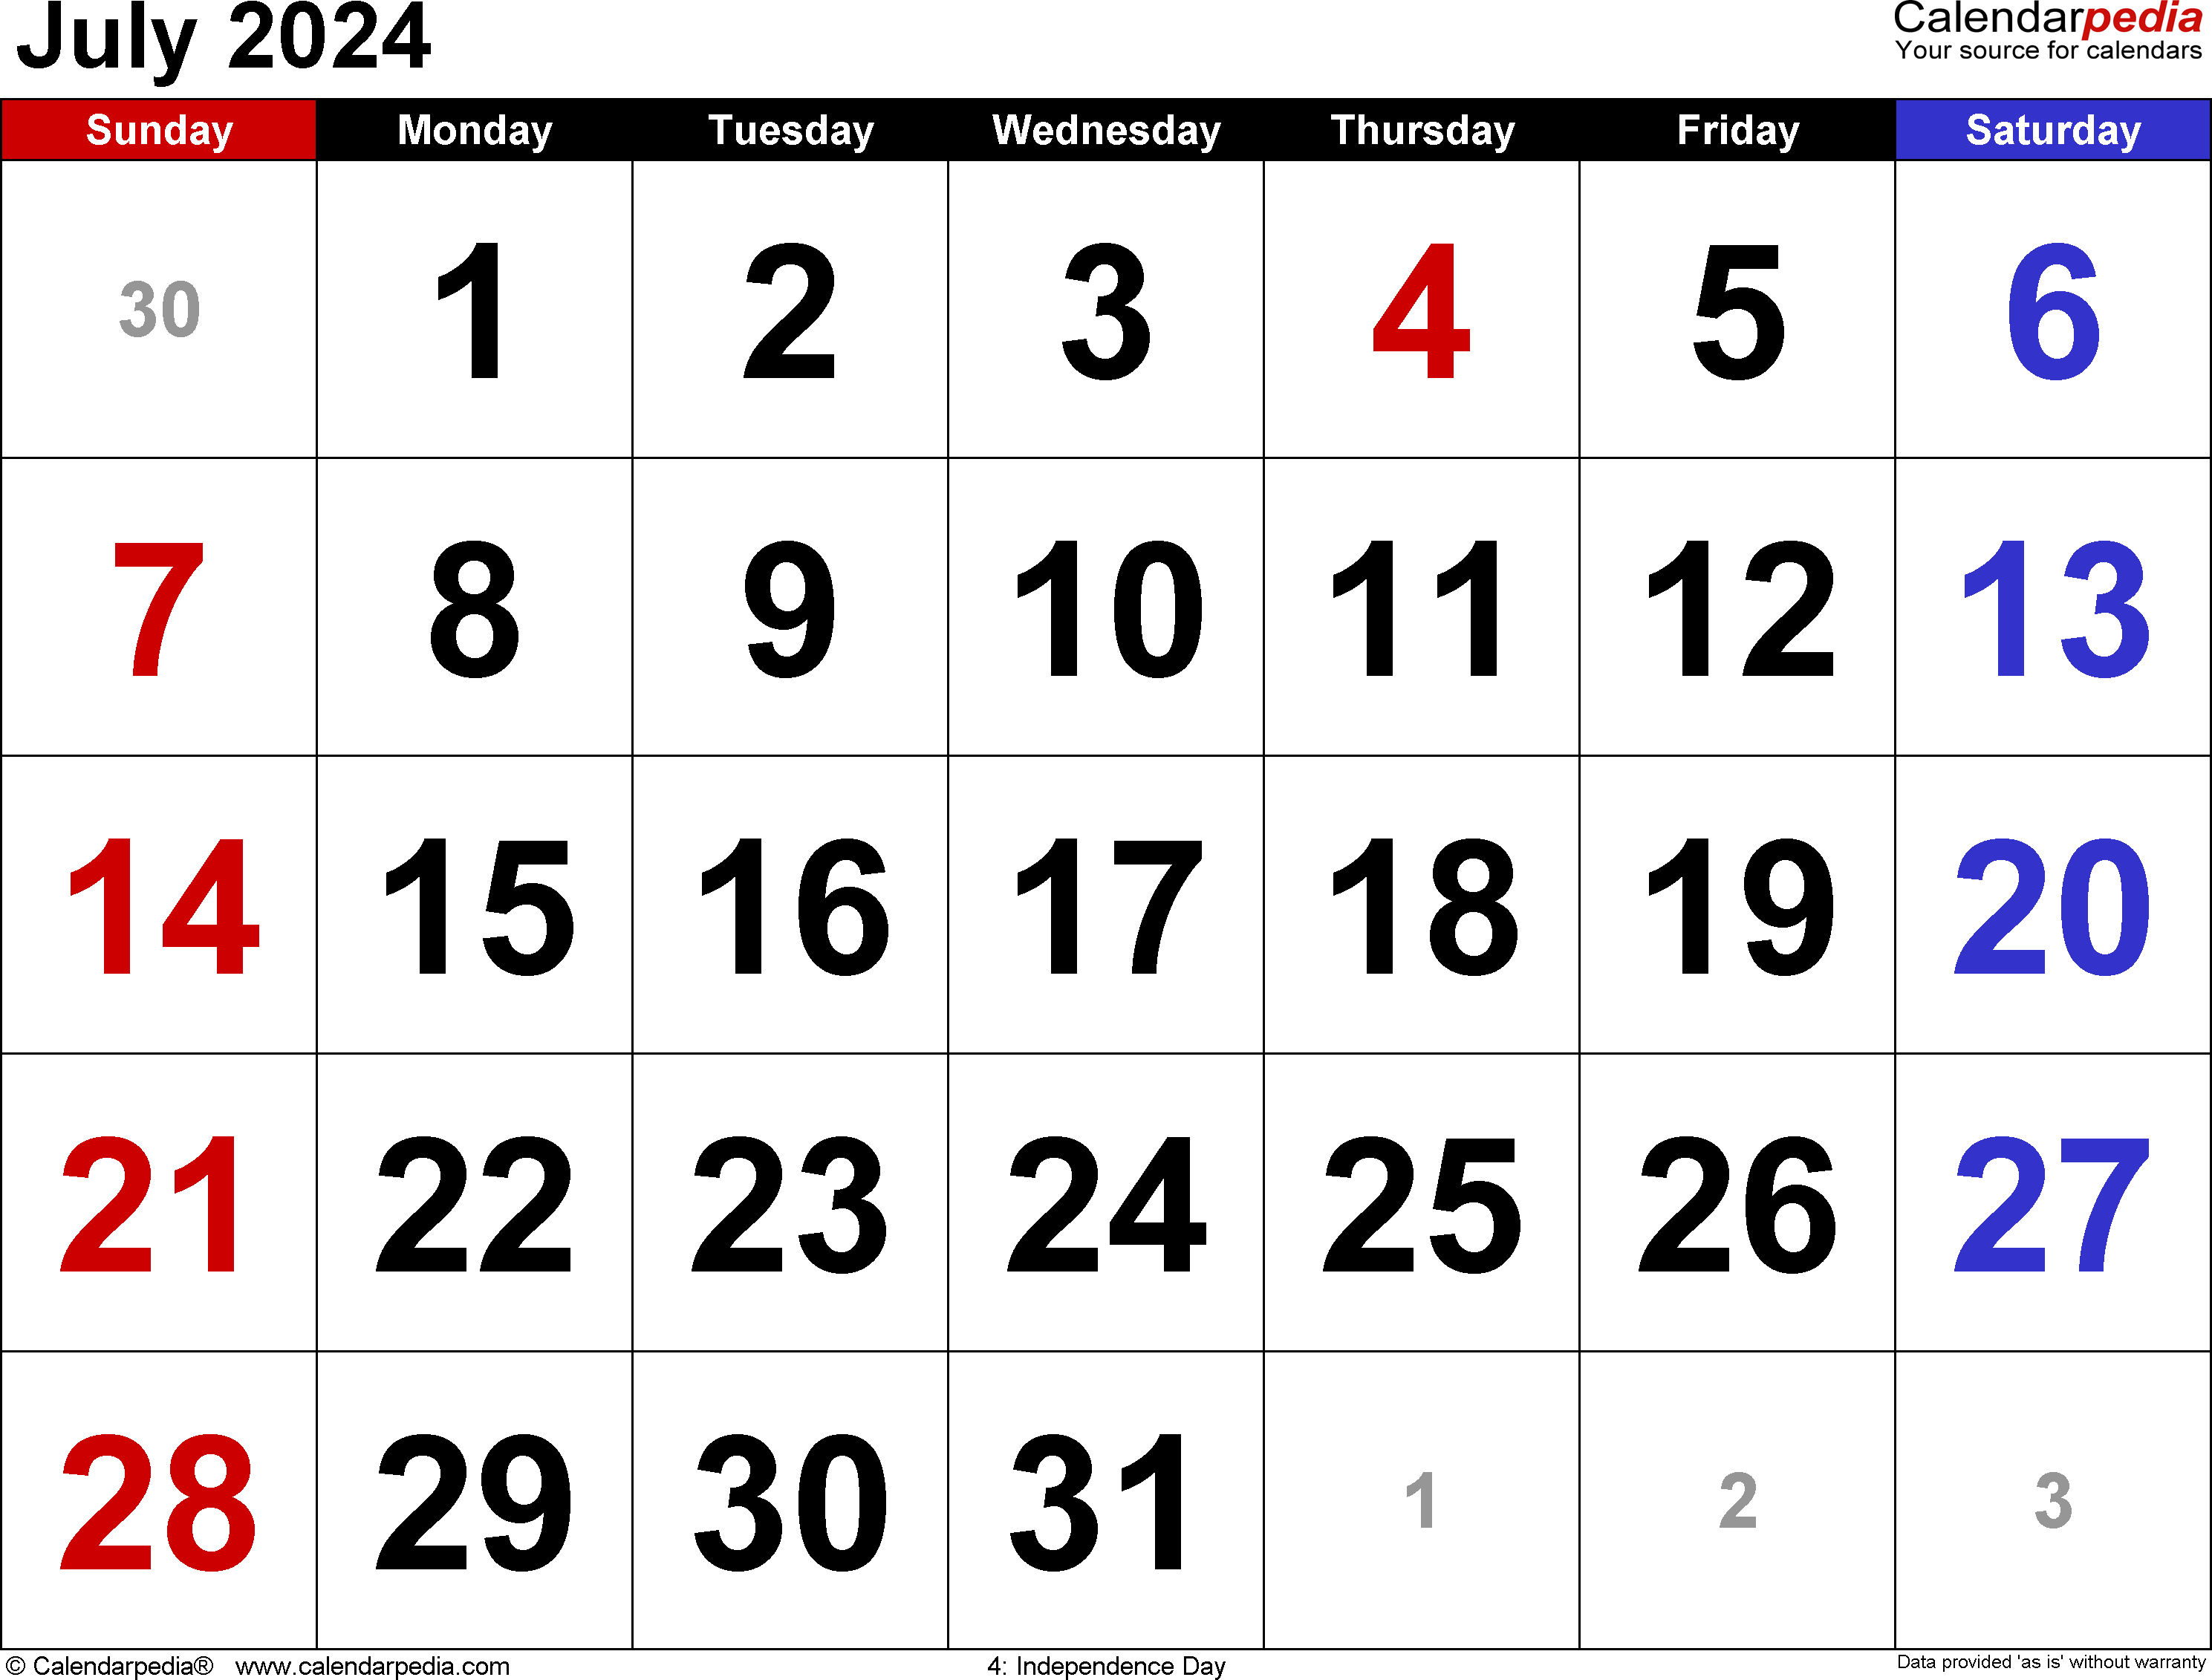 July 2024 Calendar | Templates For Word, Excel And Pdf pertaining to 7 Month Wall Calendar Starting July 2024